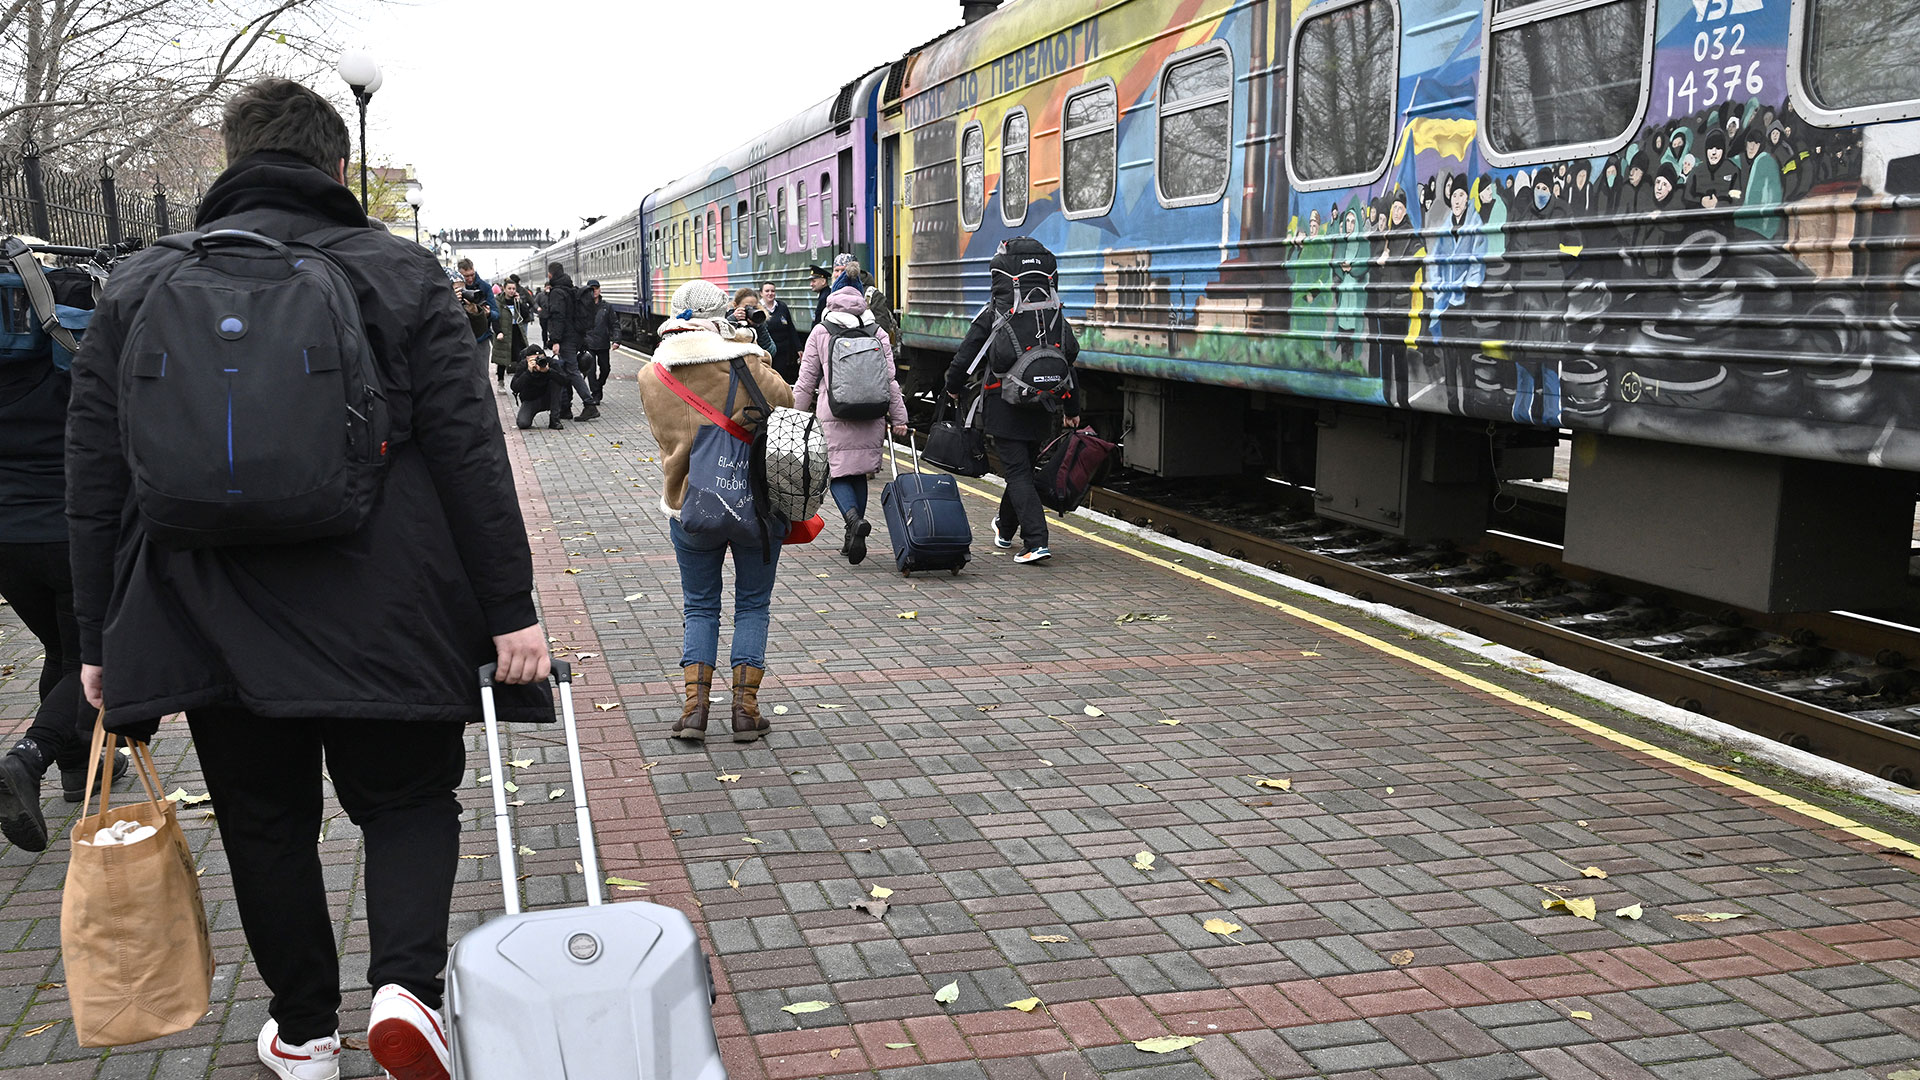 Serhiy Jlan, a member of the Kherson Regional Council, said that the first train will leave the capital at 10:14pm yesterday and arrive in Kherson at 9:00am local time on Saturday (GENYA SAVILOV/AFP)